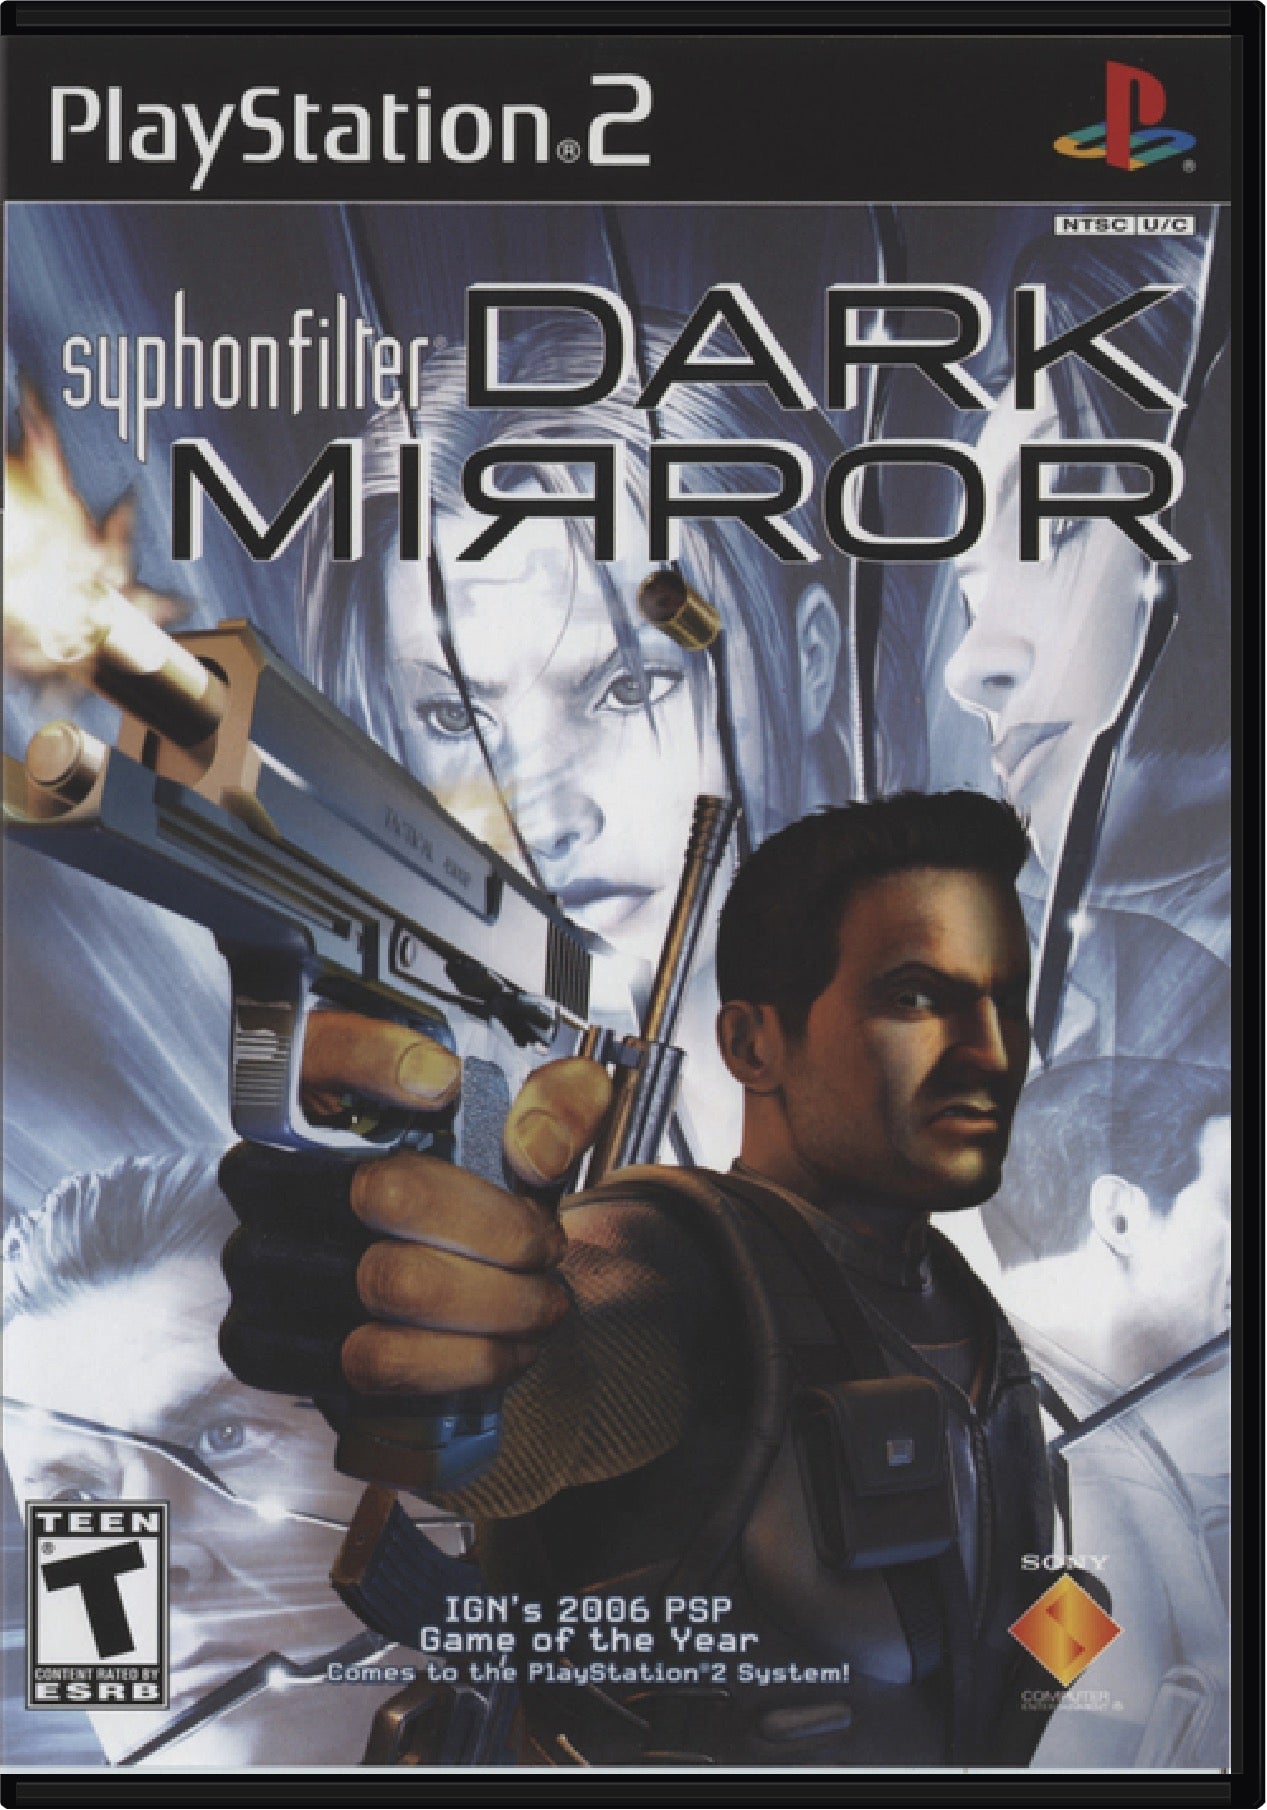 Syphon Filter Dark Mirror Cover Art and Product Photo